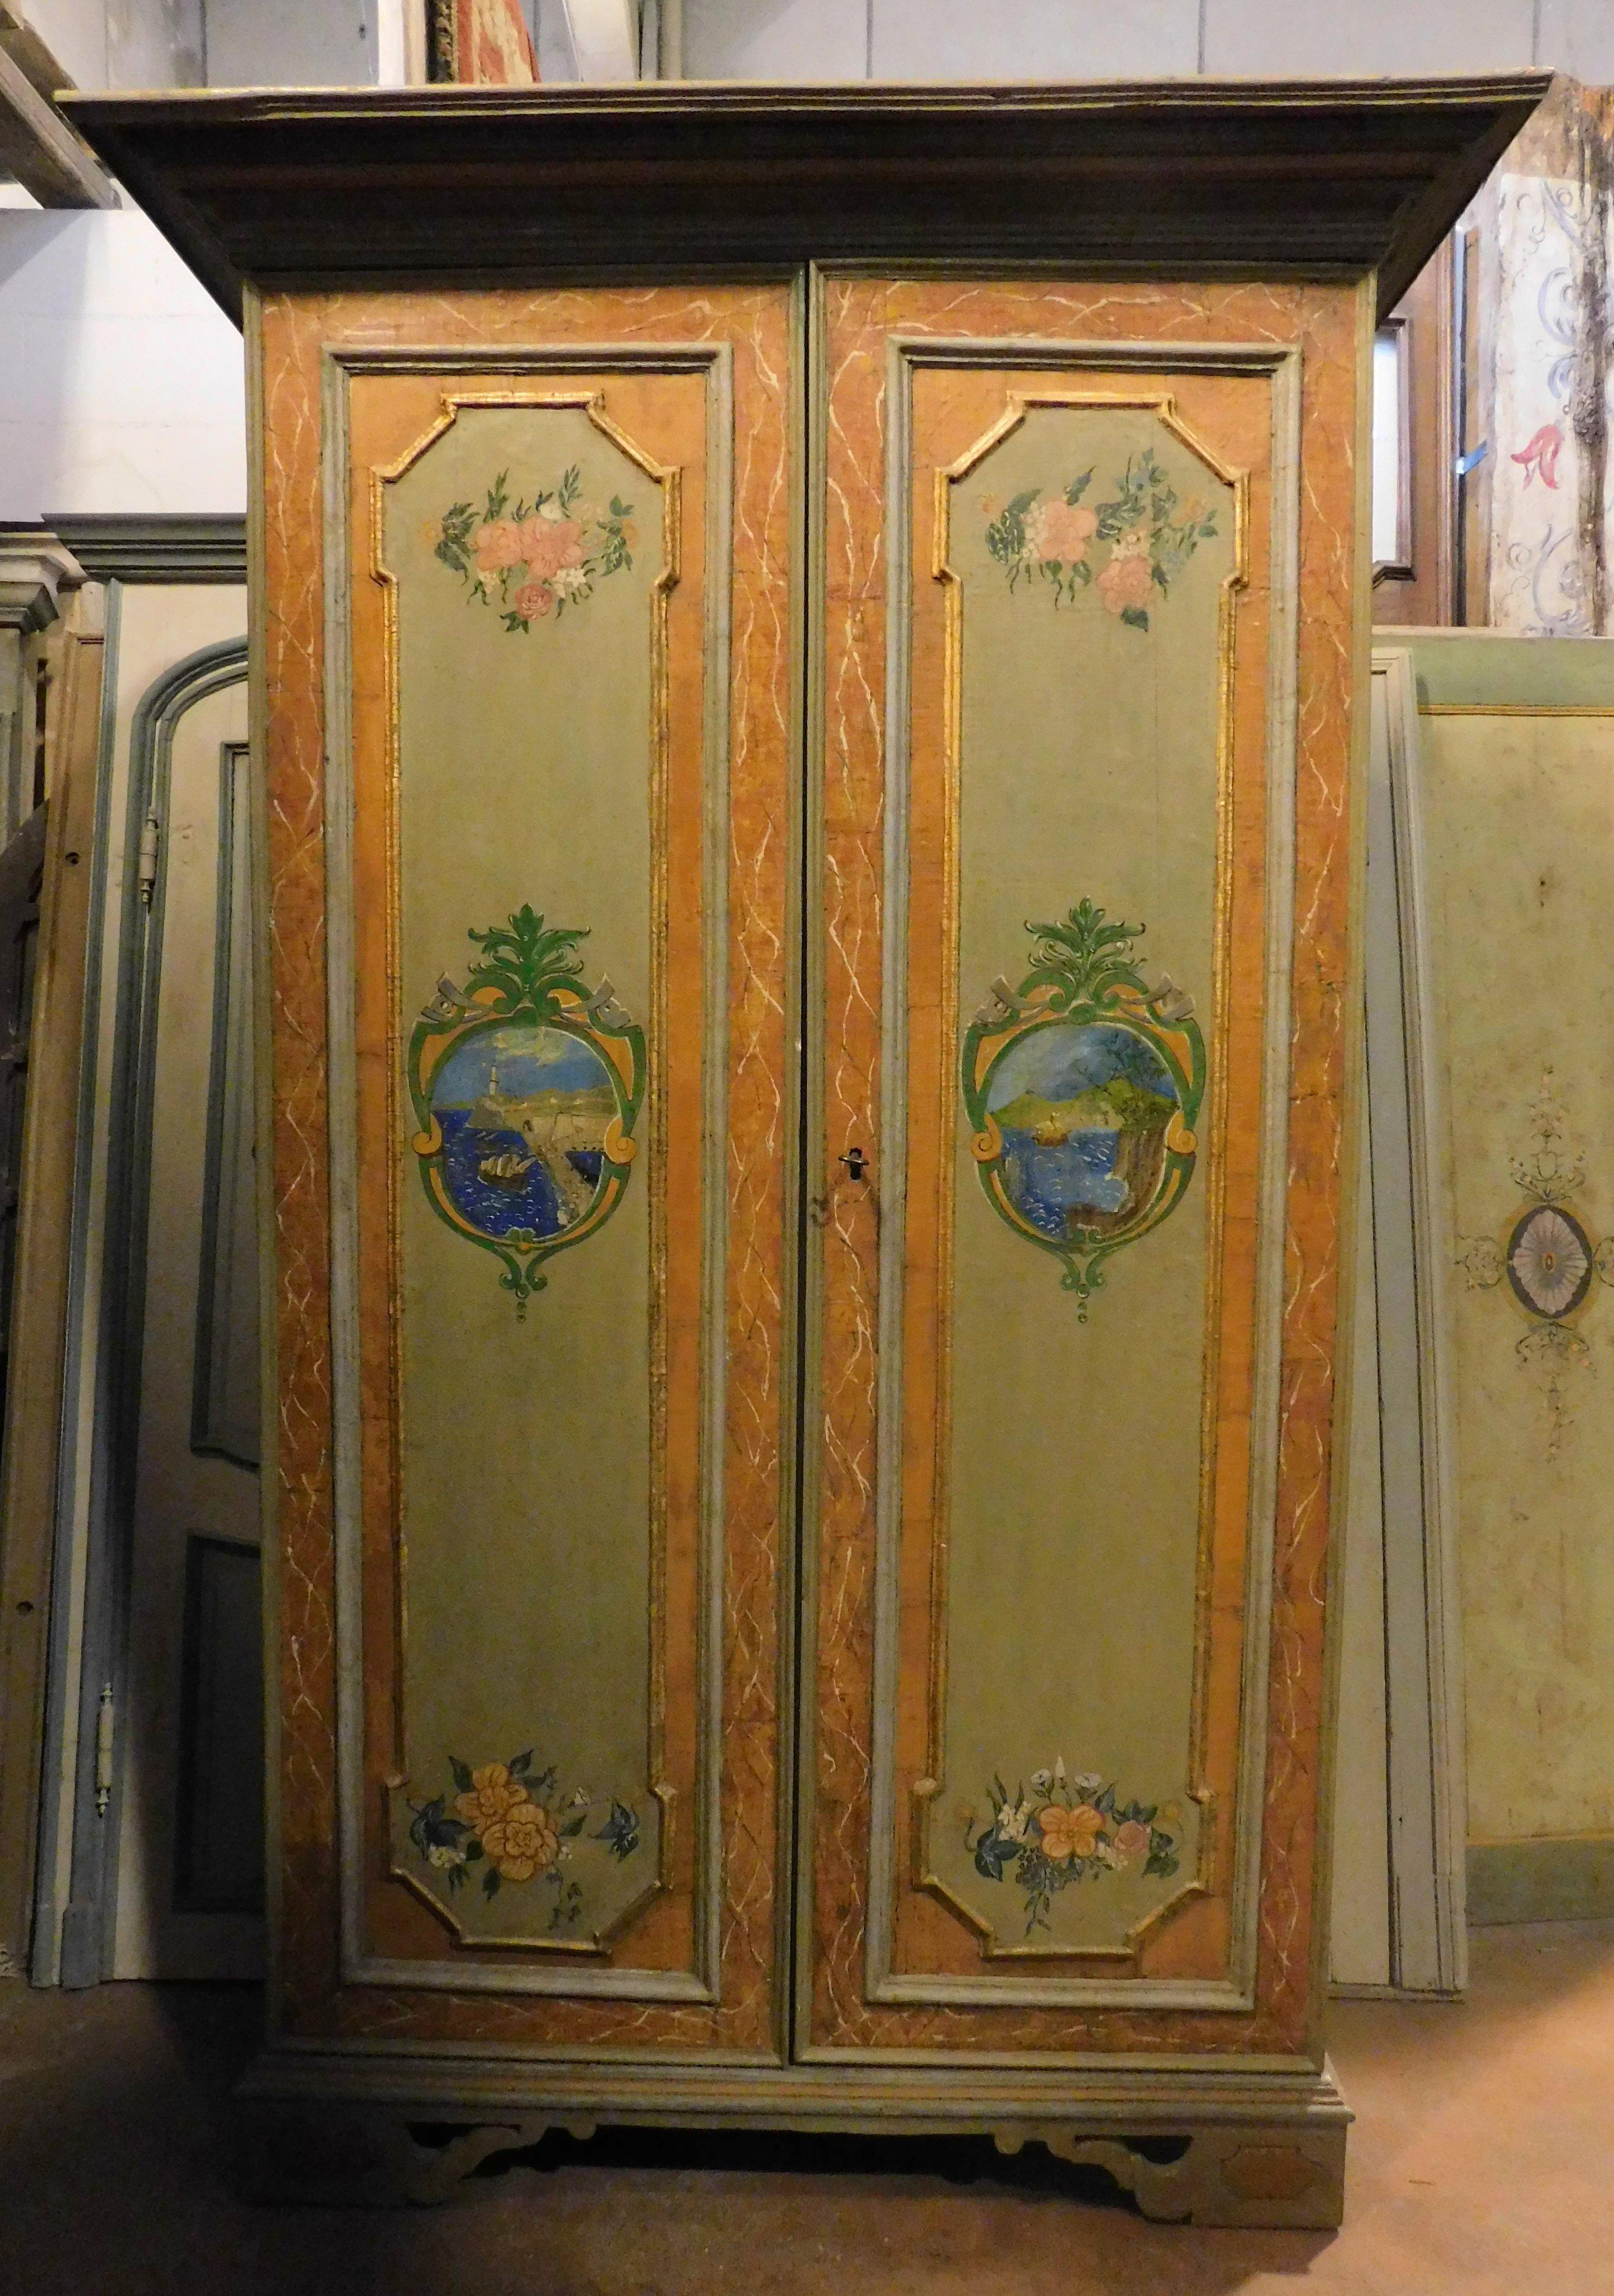 Antique wardrobe, hand-painted piece of furniture with maritime views, floral decorations and carved moulds, views of Genoa (Italy), which is where the piece of furniture comes from, hand-built in the 19th century.
maximum size cm H 244 x w 190 x D